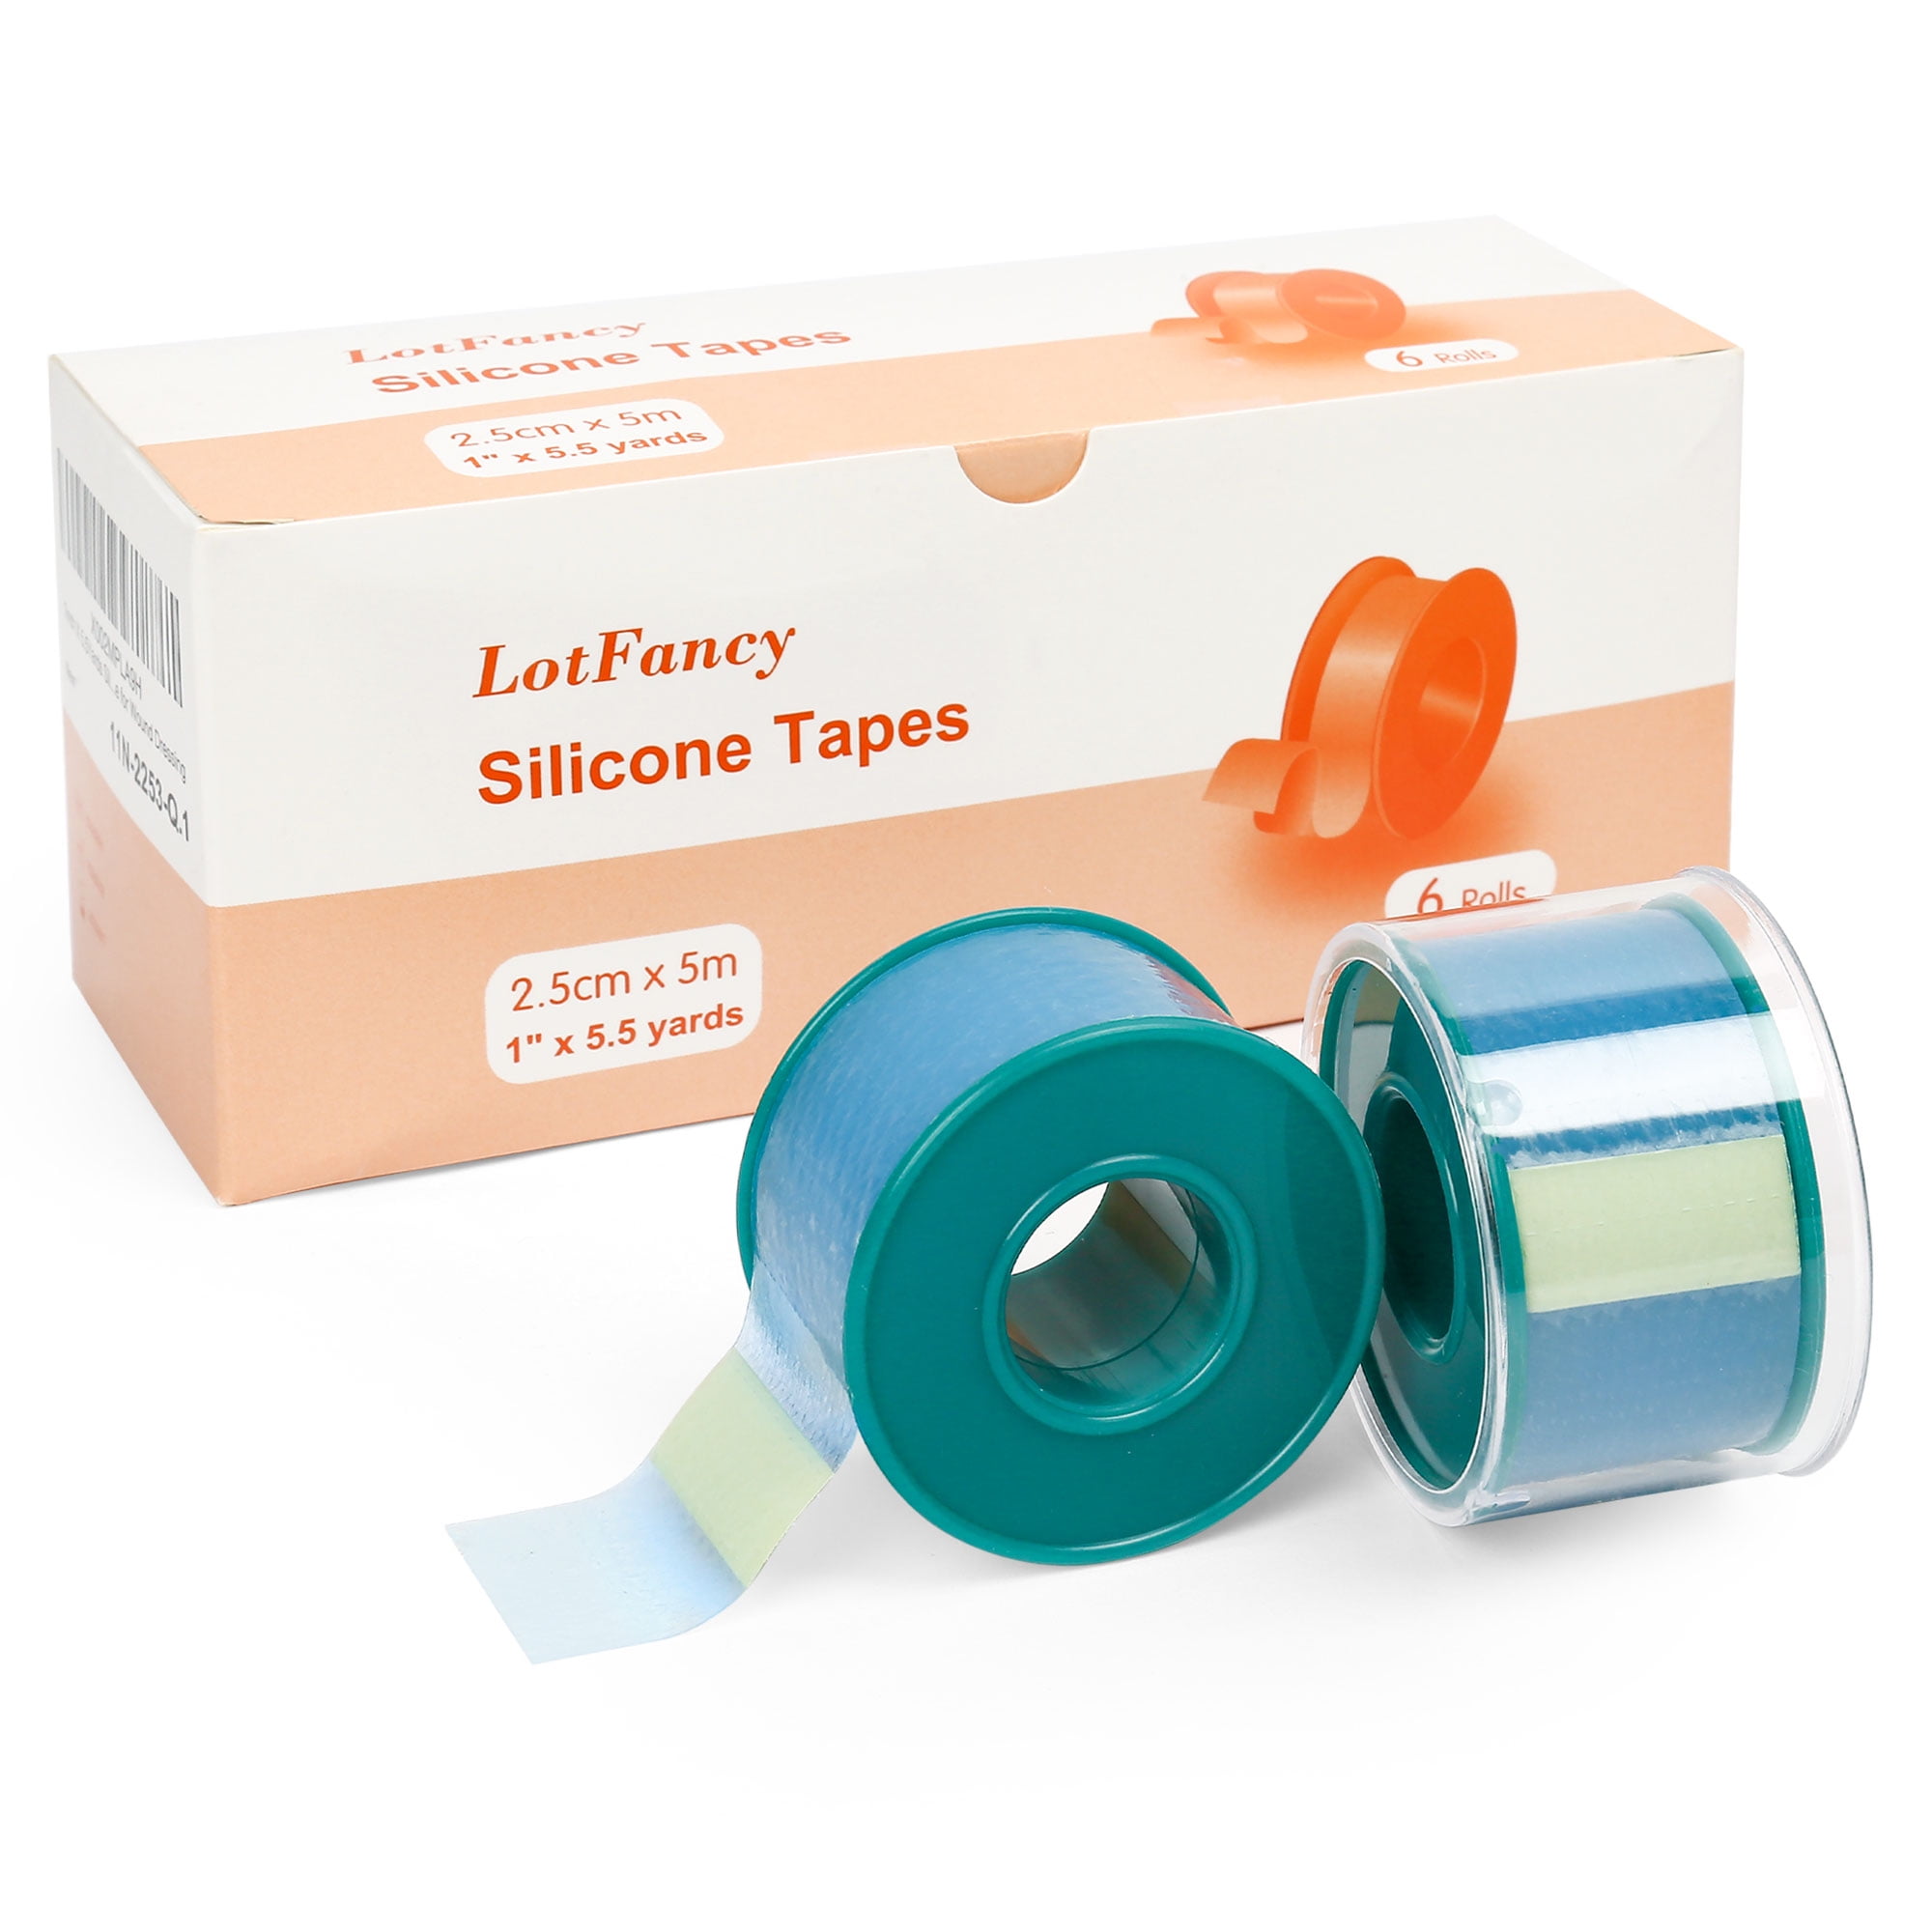 LotFancy Medical Tape, 6Rolls 2inch x 10Yards, Adhesive Hypoallergenic  Surgical Paper Tapes, Wound First Aid Tape, 2 Dispensers Included 2 Inch x  10 Yard (6 Pack + 2 Dispensers)